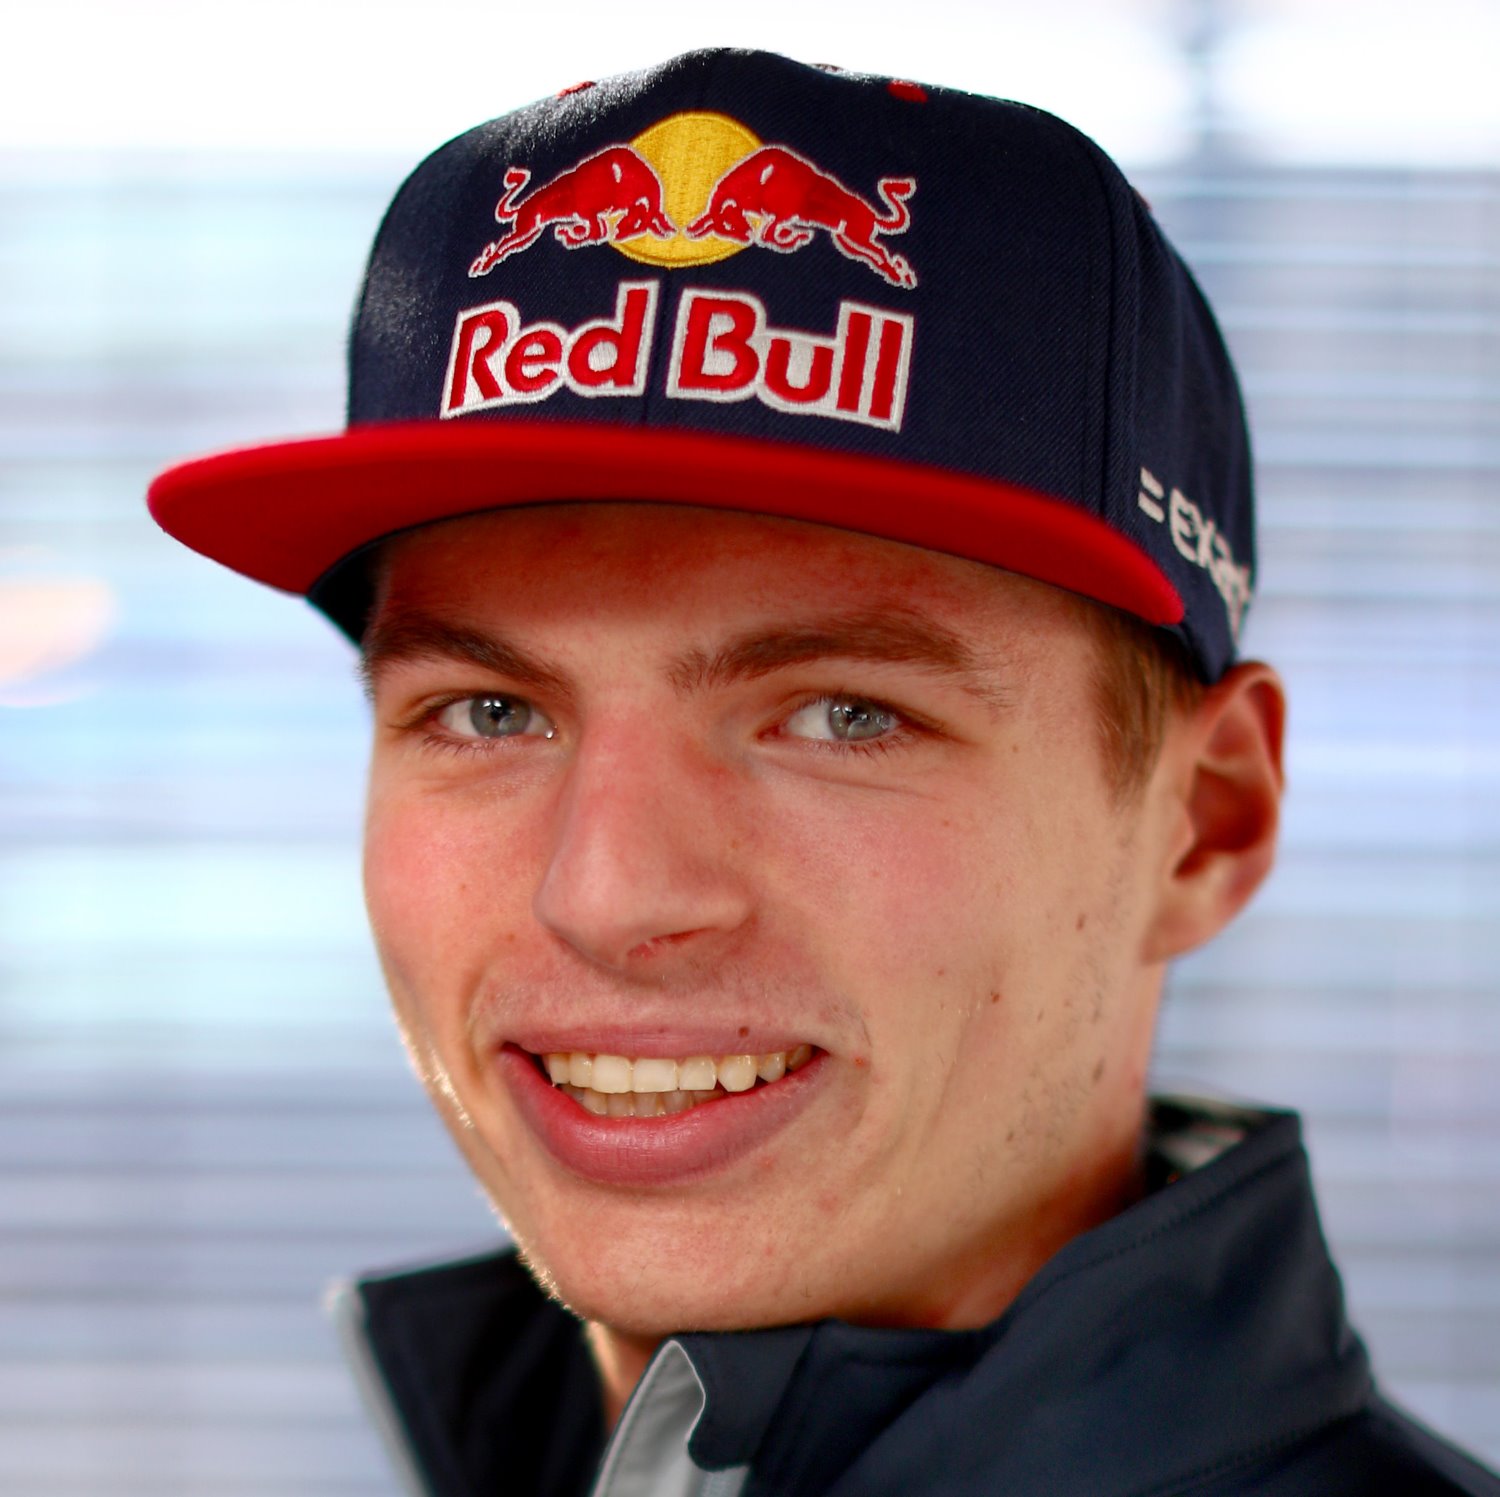 Max Verstappen a future champion says Prost. Who can disagree?